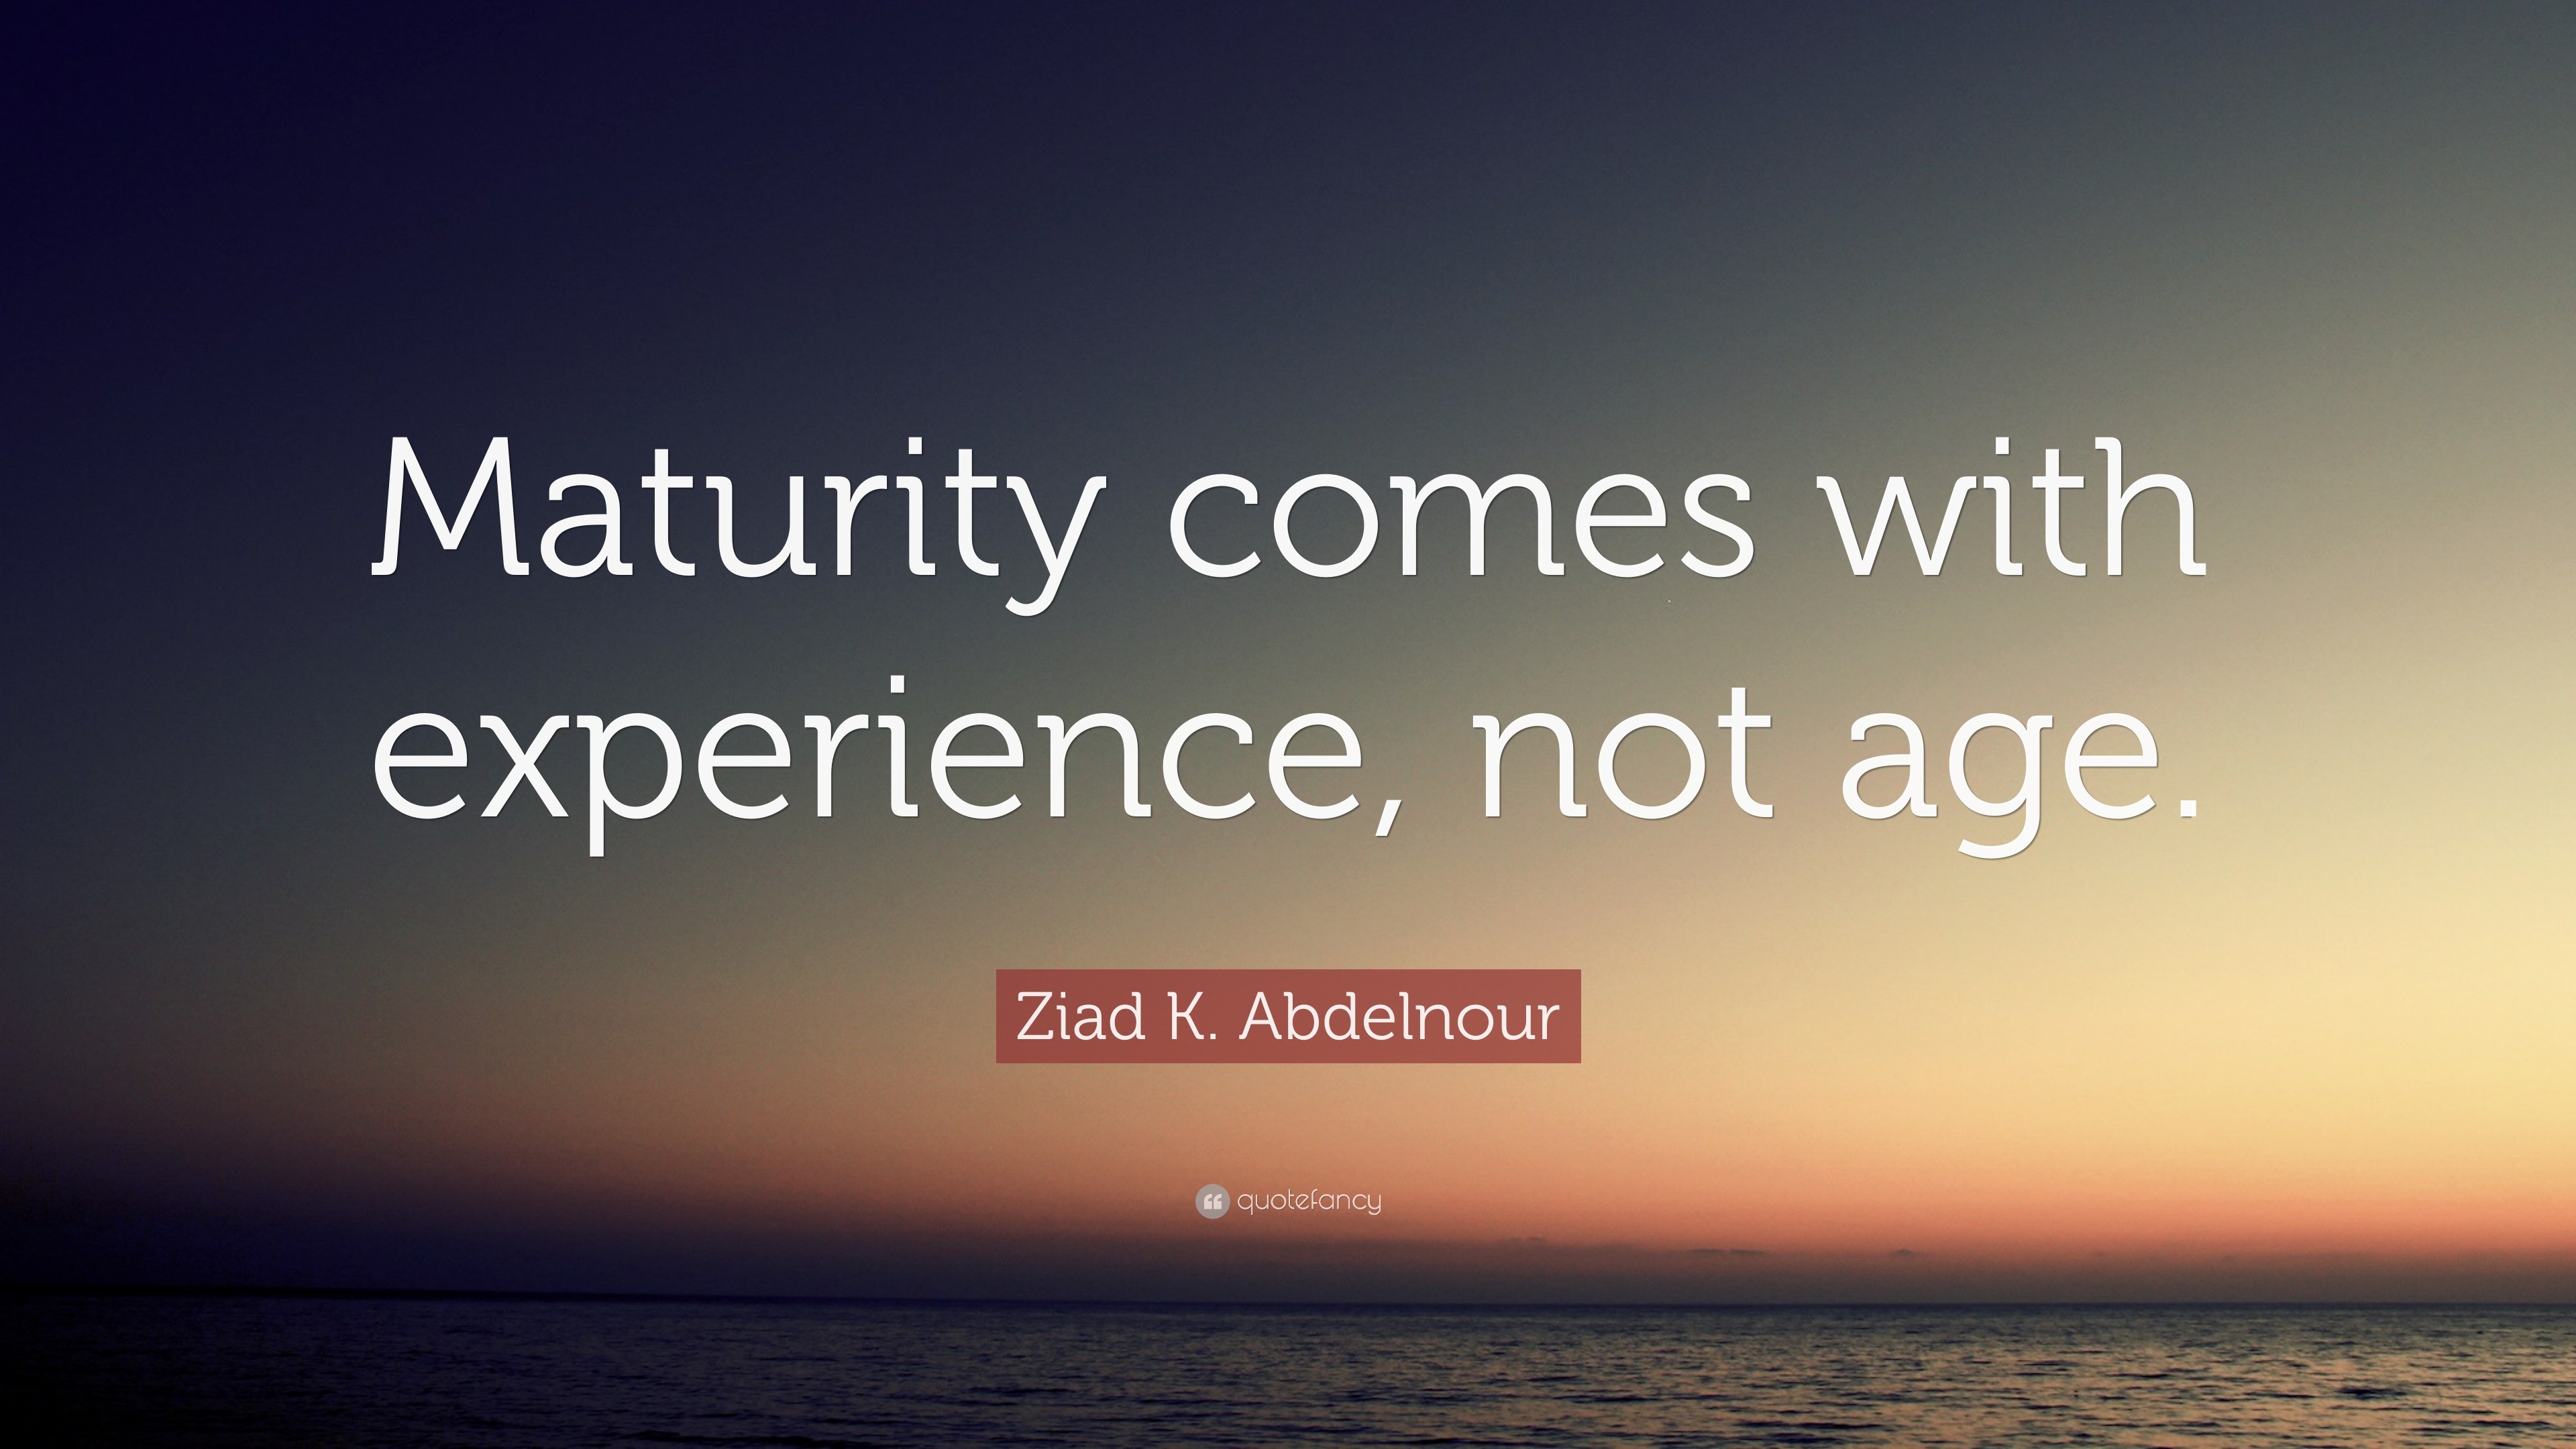 Ziad K. Abdelnour Quote “Maturity comes with experience